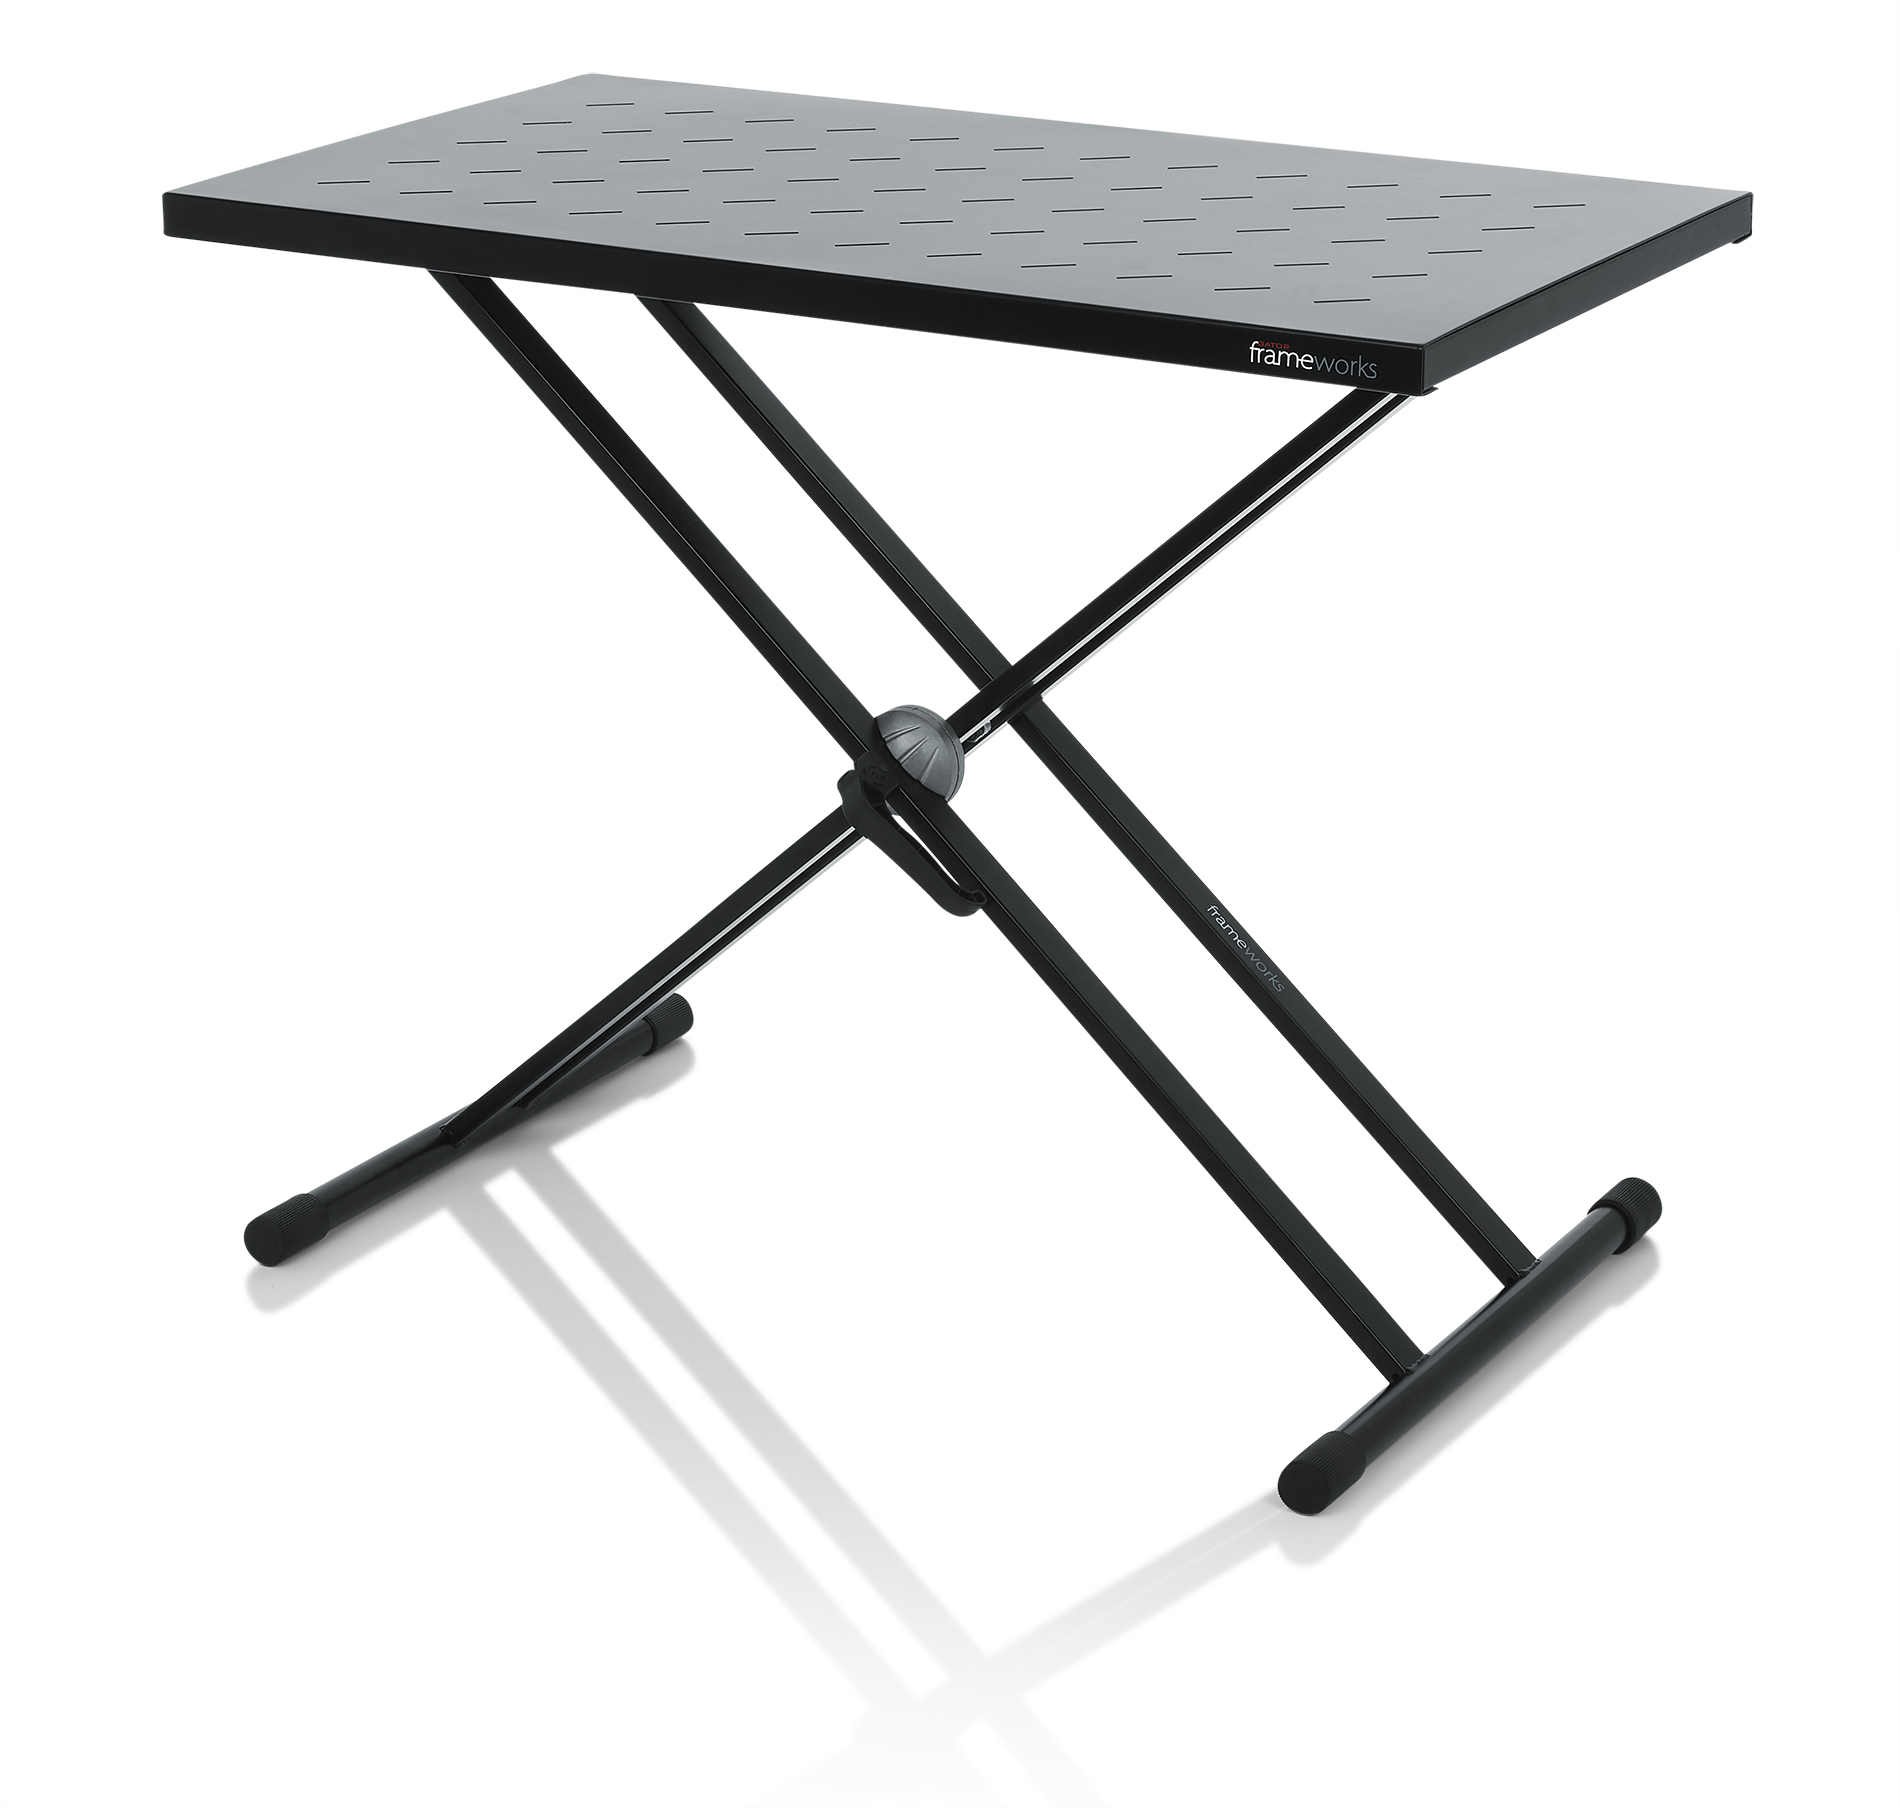 Utility table top with double-X stand-GFW-UTL-XSTDTBLTOPSET